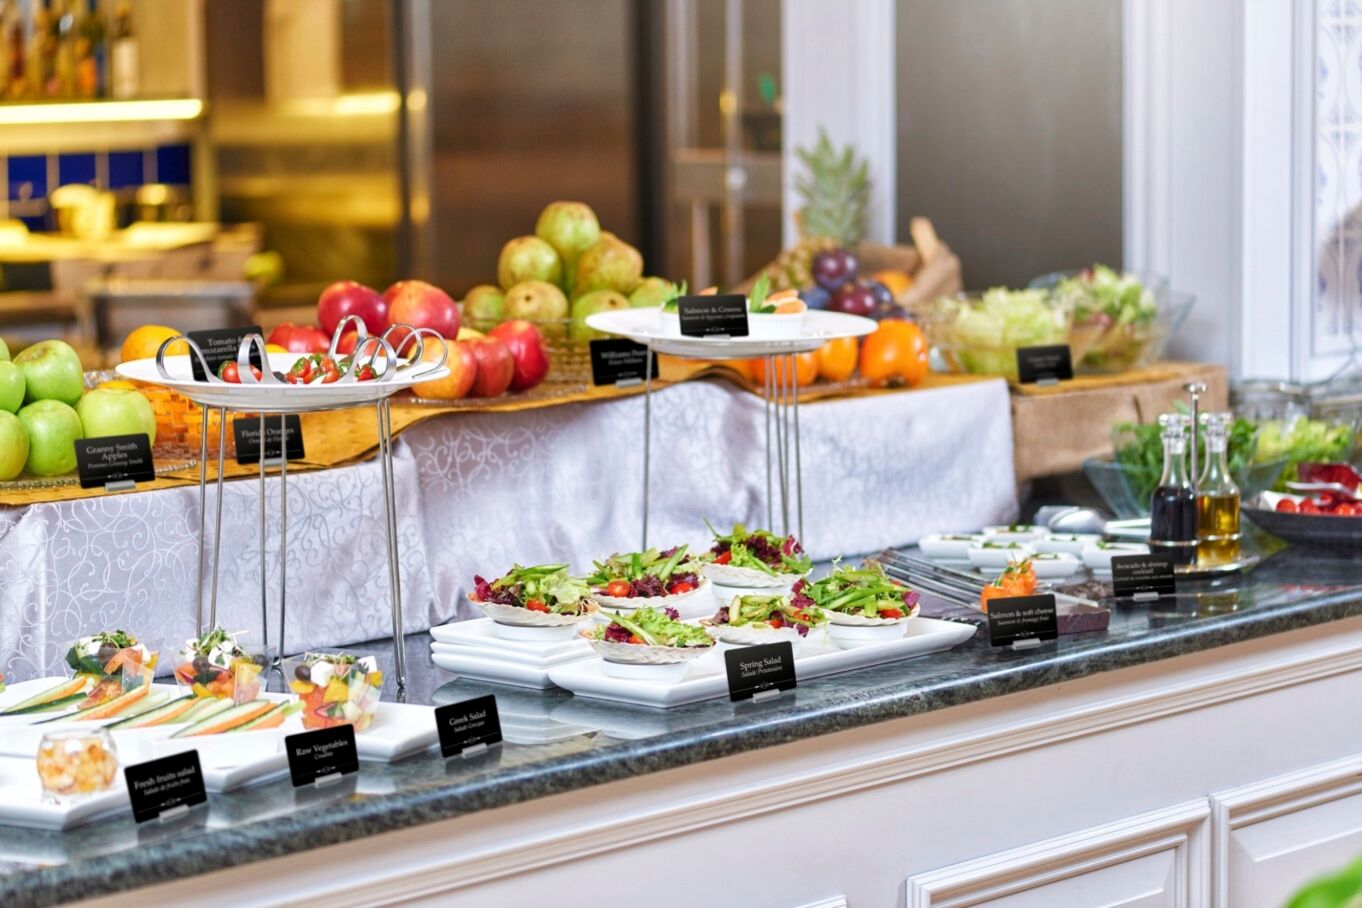 Buffet Display Labels for hotels and restaurants can be easily created with Edikio plastic card printers